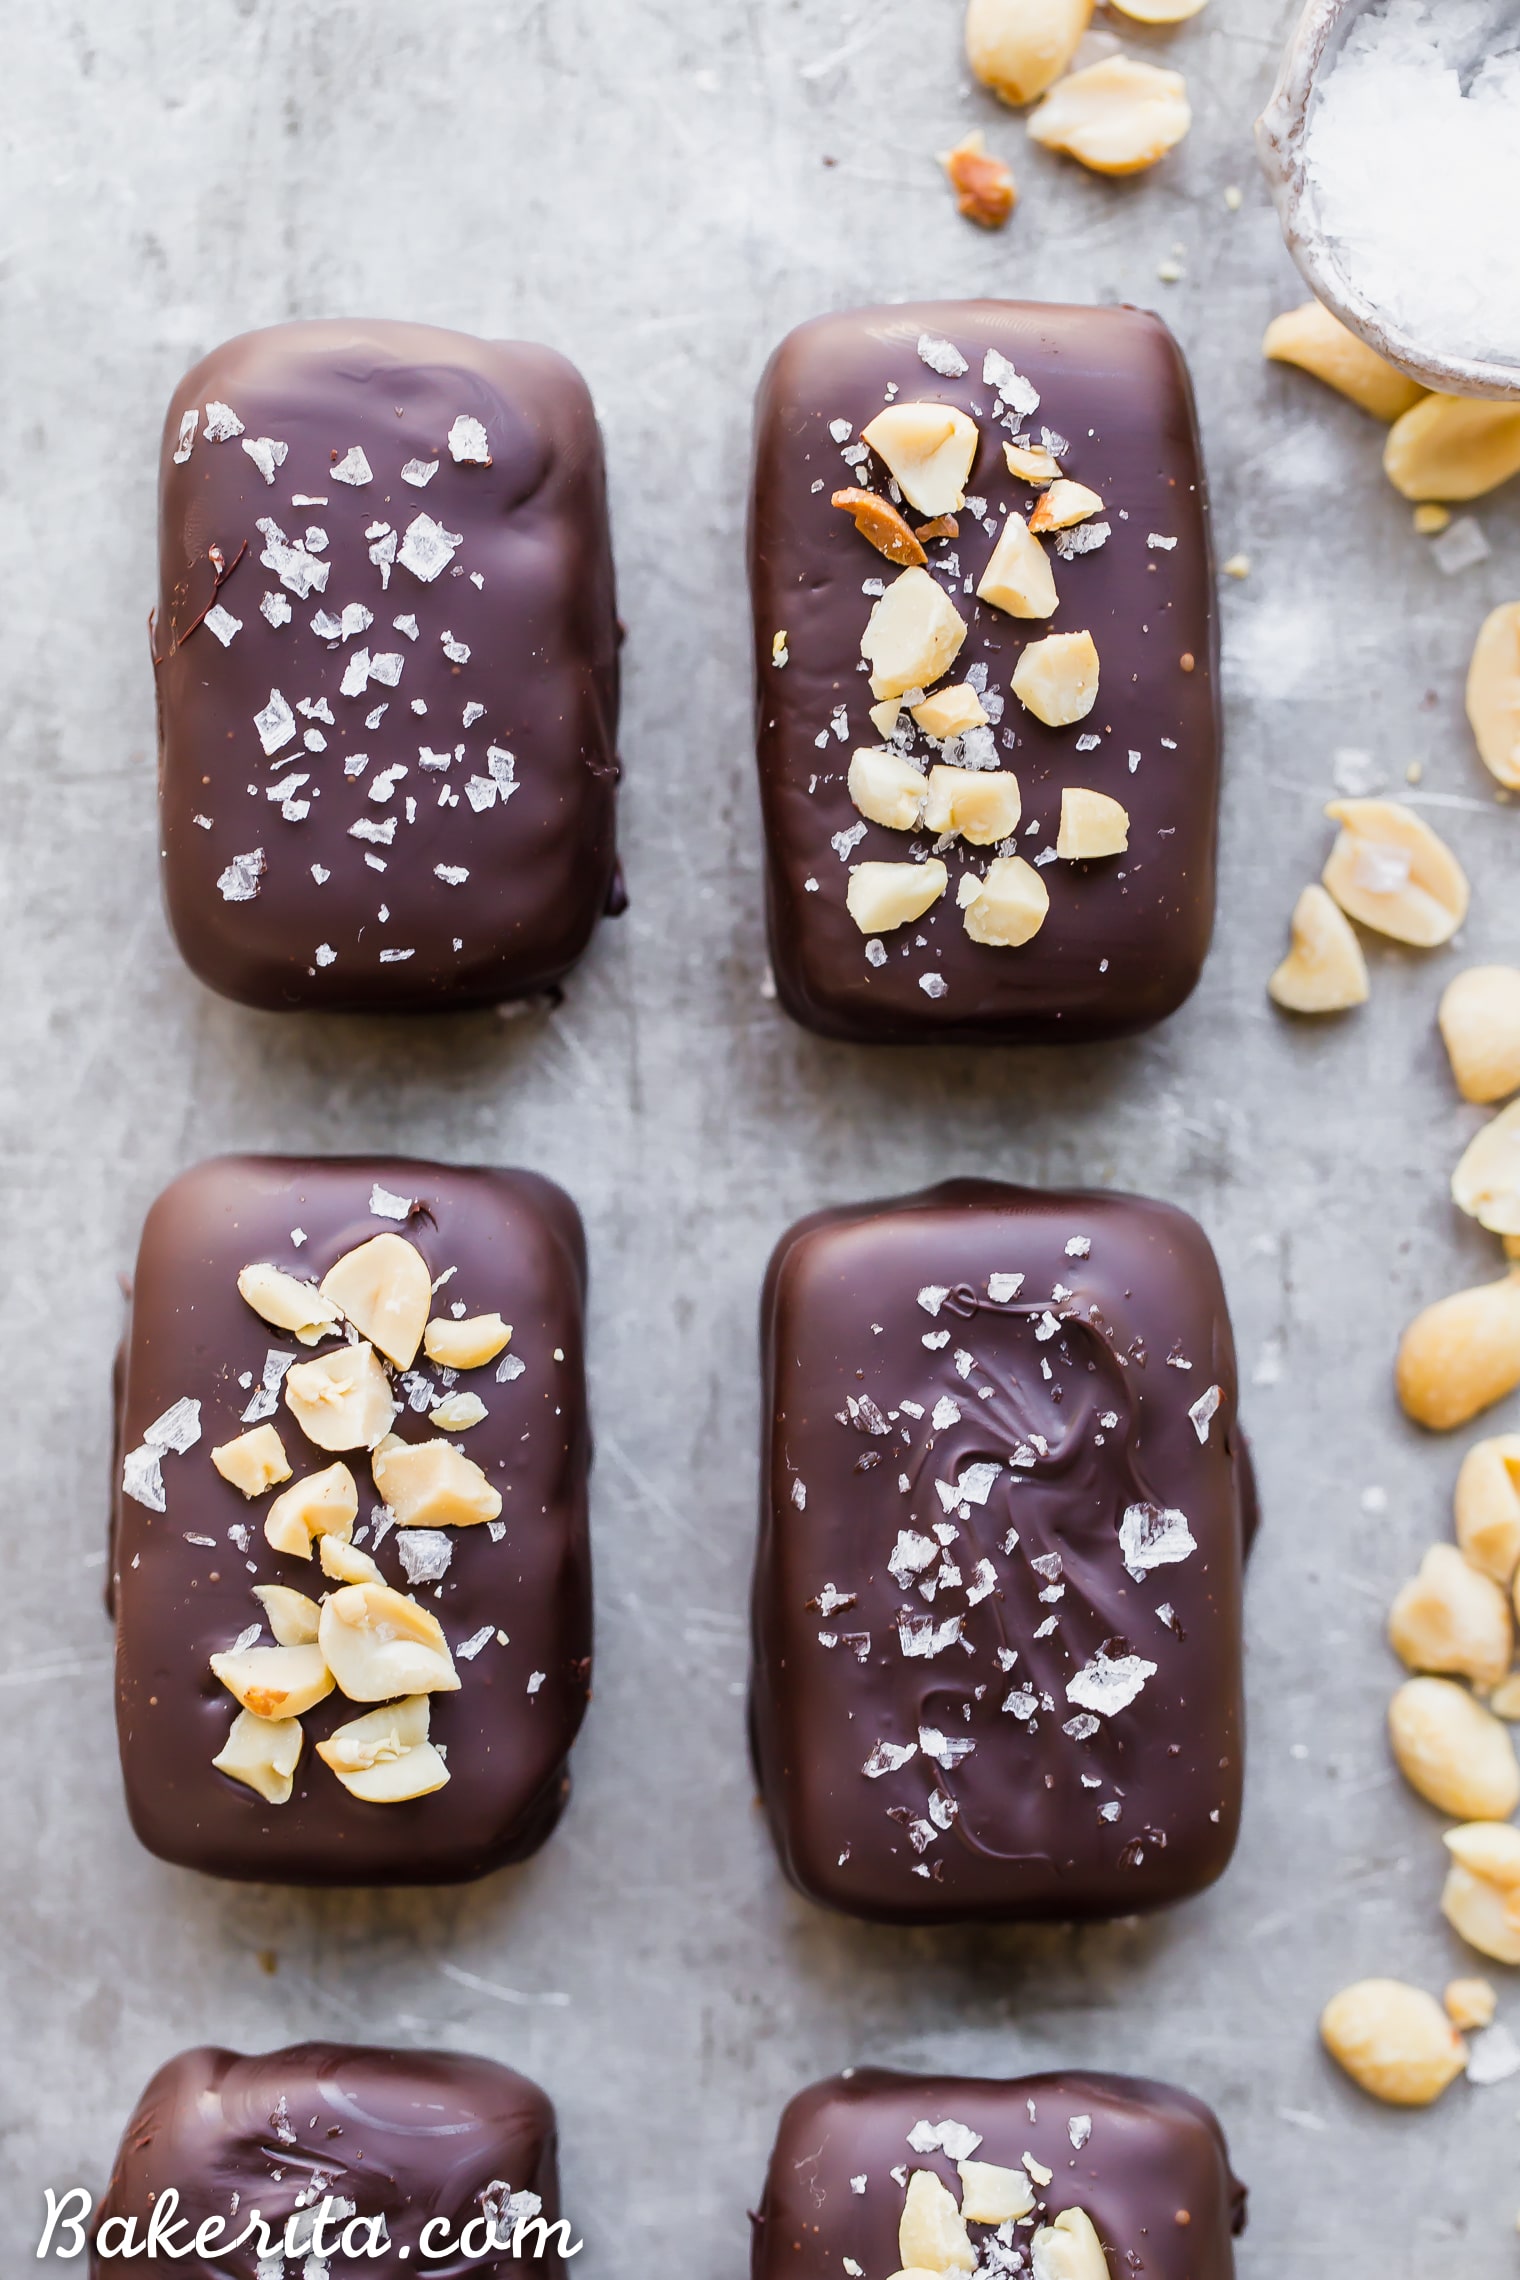 These Dark Chocolate Peanut Butter Truffle Bars are easy to make and SO delicious - these are the perfect healthier candy bar! They're gluten-free and grain-free with a vegan option.